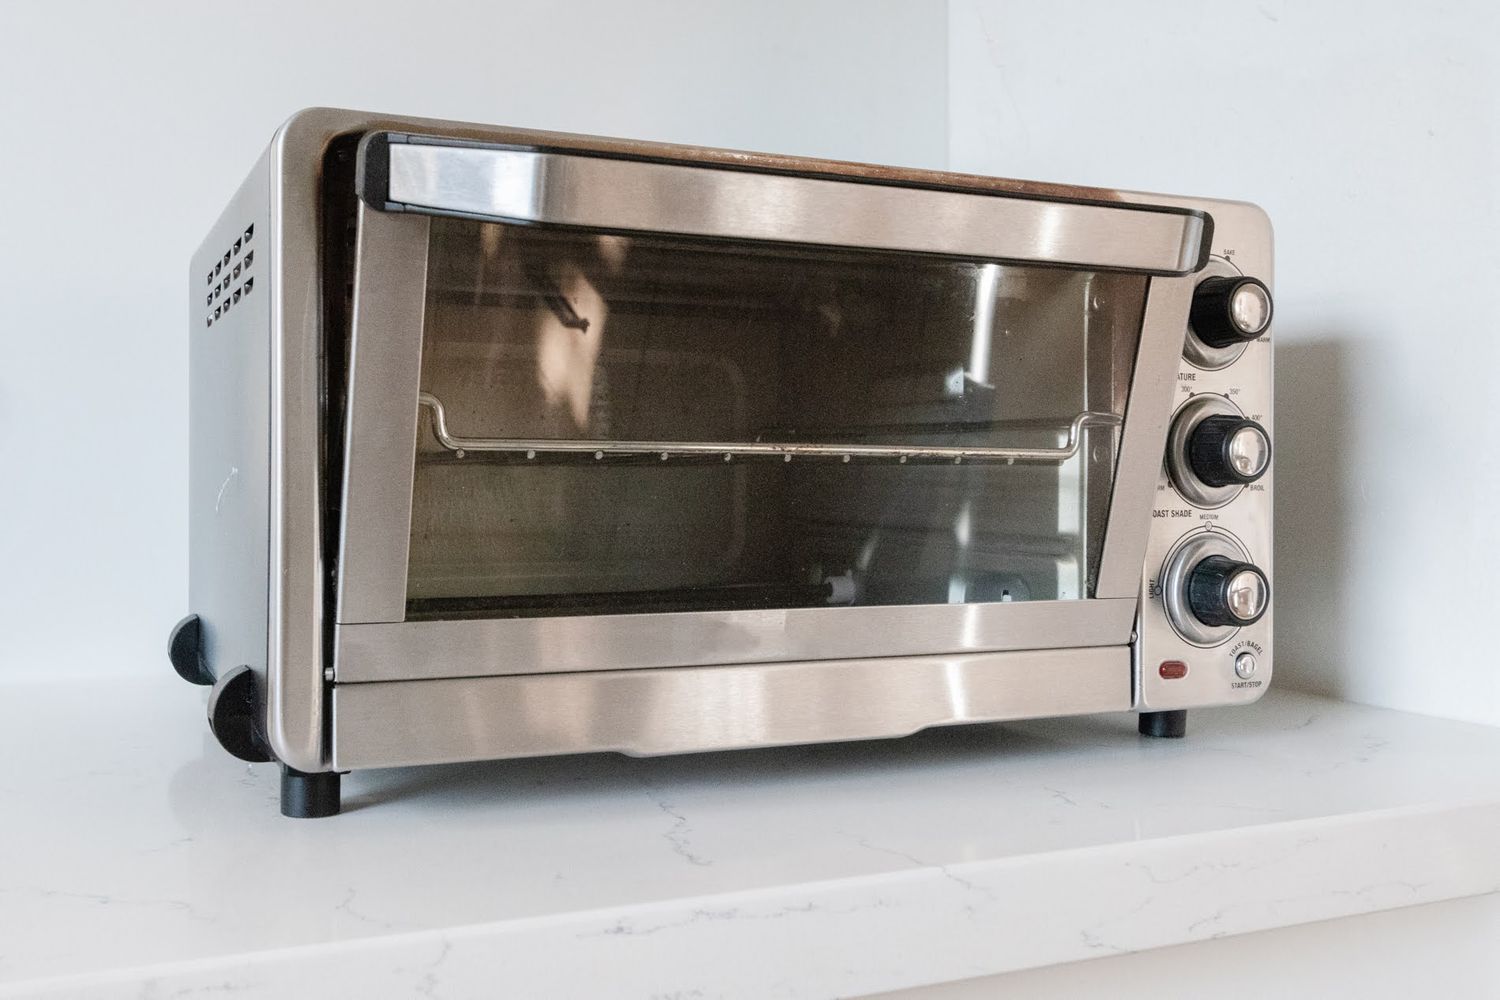 choosing a toaster oven over a pop-up toaster